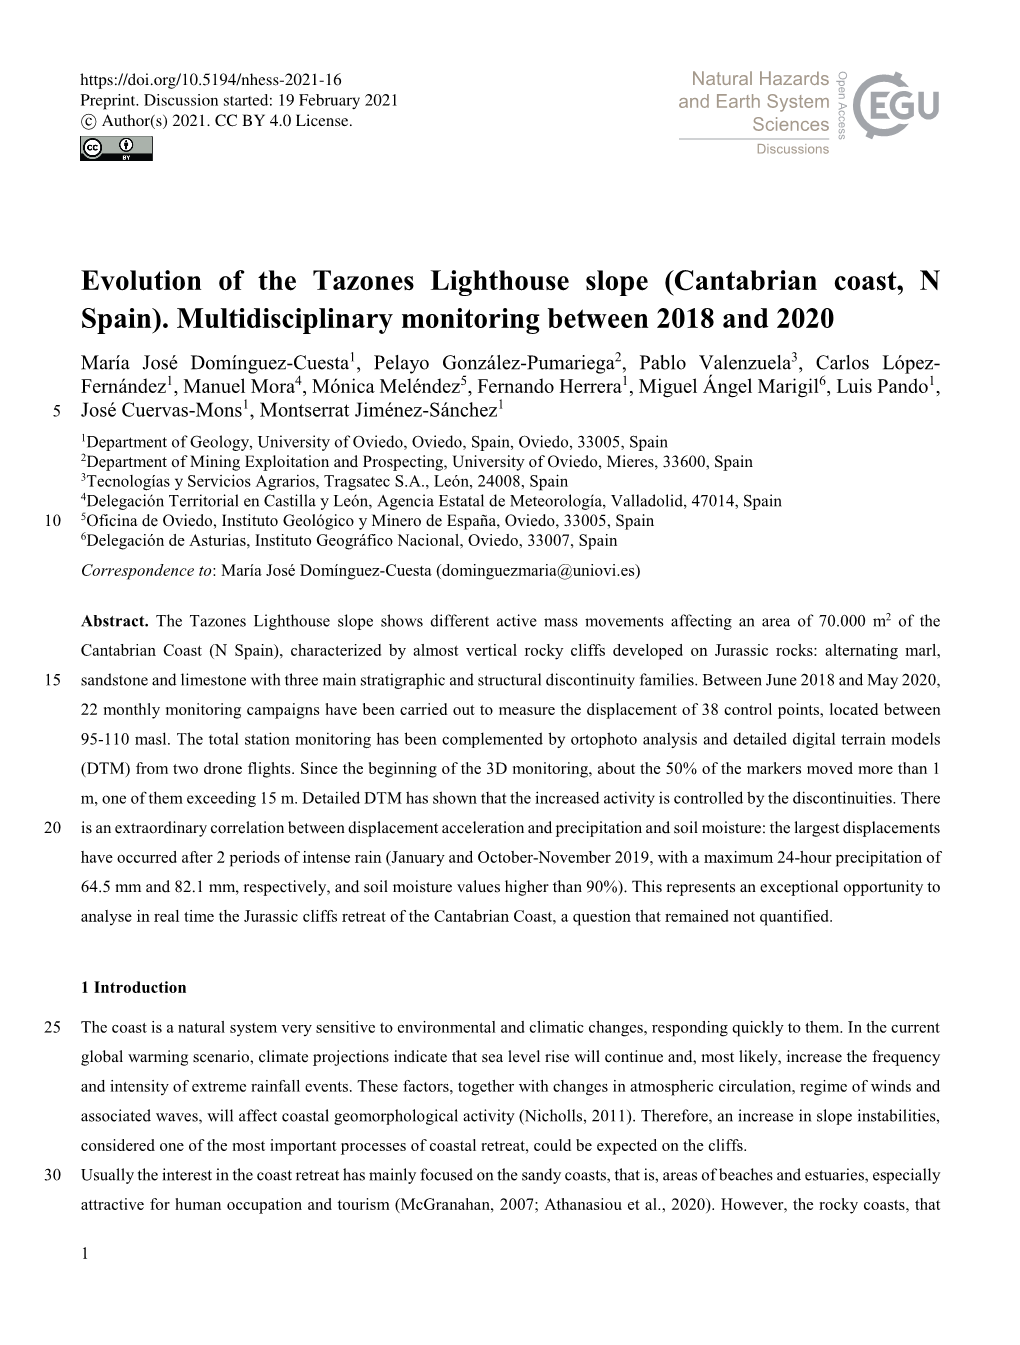 Evolution of the Tazones Lighthouse Slope (Cantabrian Coast, N Spain). Multidisciplinary Monitoring Between 2018 and 2020